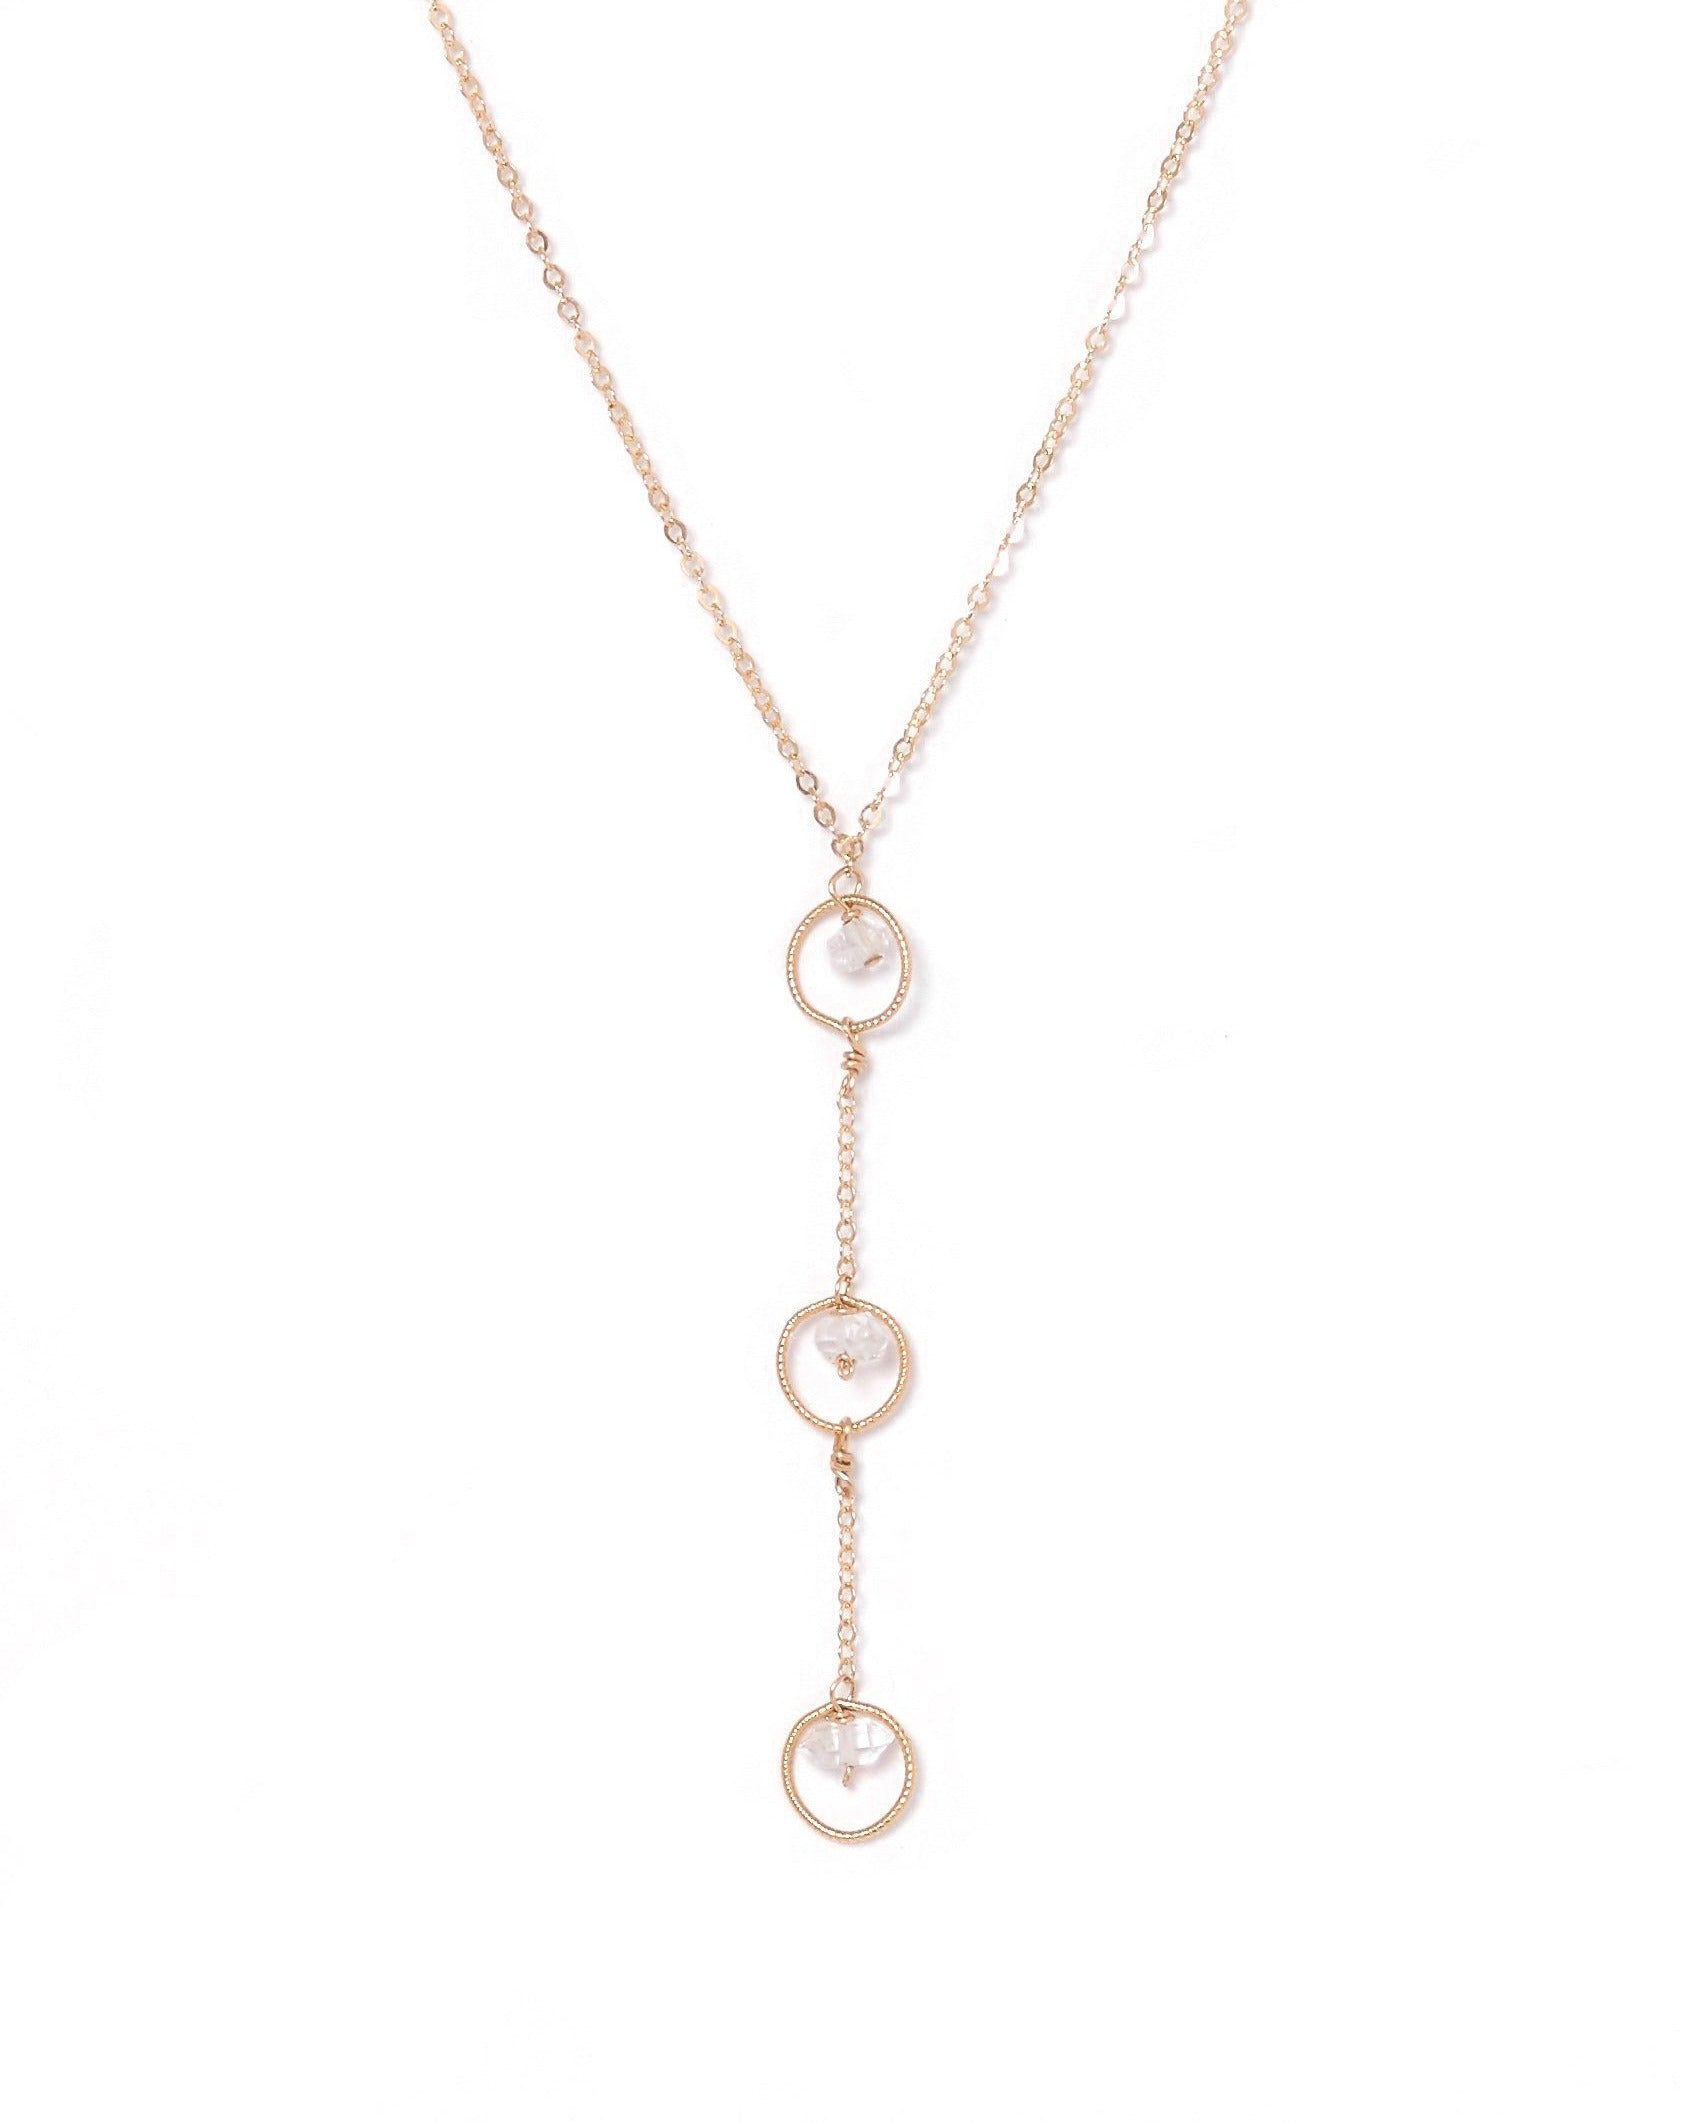 Tre Amos Necklace by KOZAKH. A 16 to 18 inch adjustable length, 1 1/2 inches drop lariat style necklace, crafted in 14K Gold Filled, featuring Herkimer Diamonds.